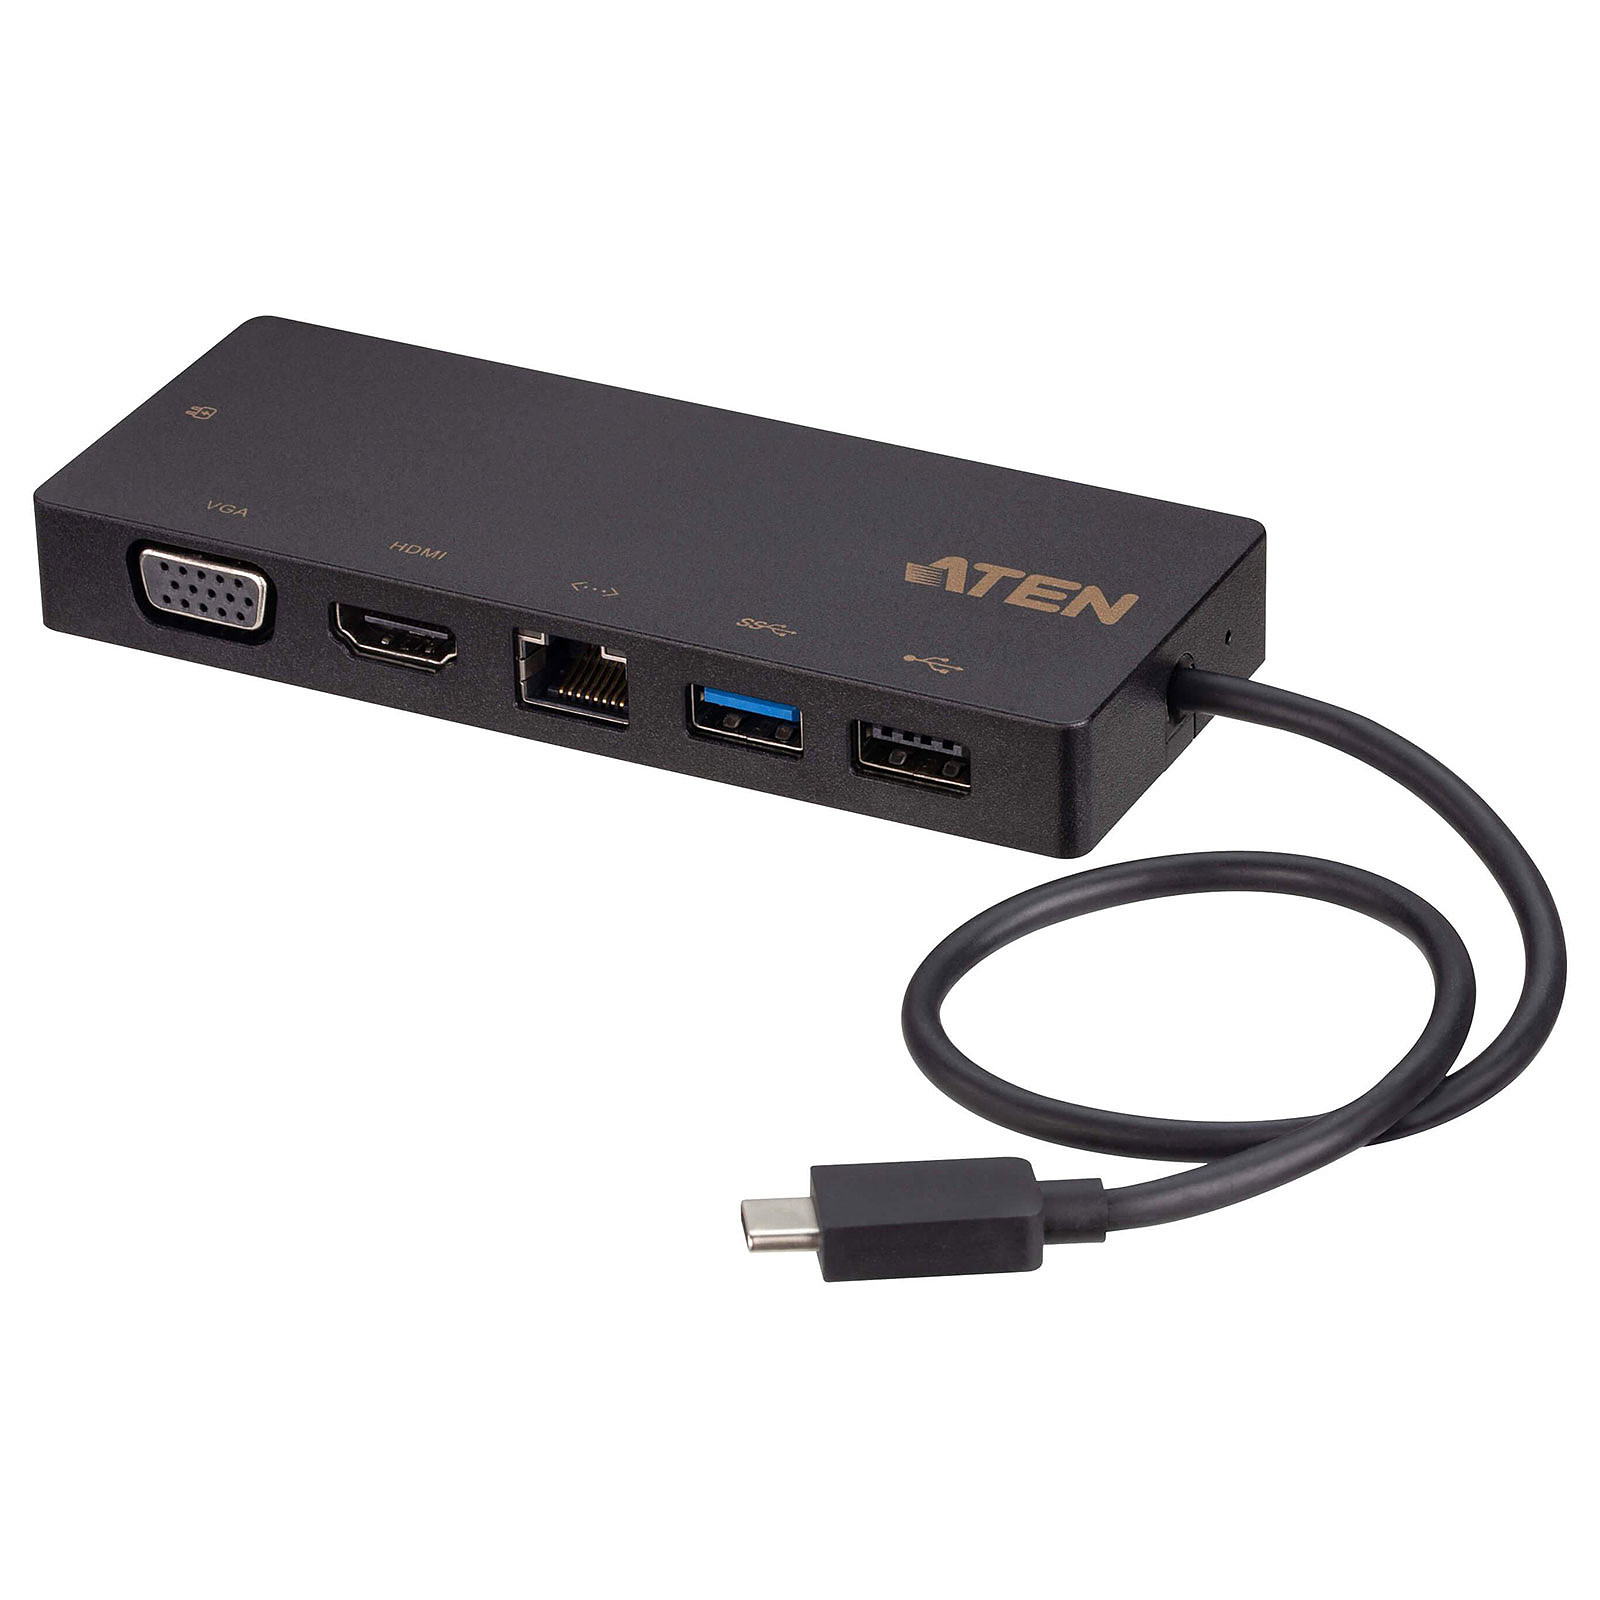 Aten UH3236 · Occasion - Station d'accueil PC portable Aten - Occasion